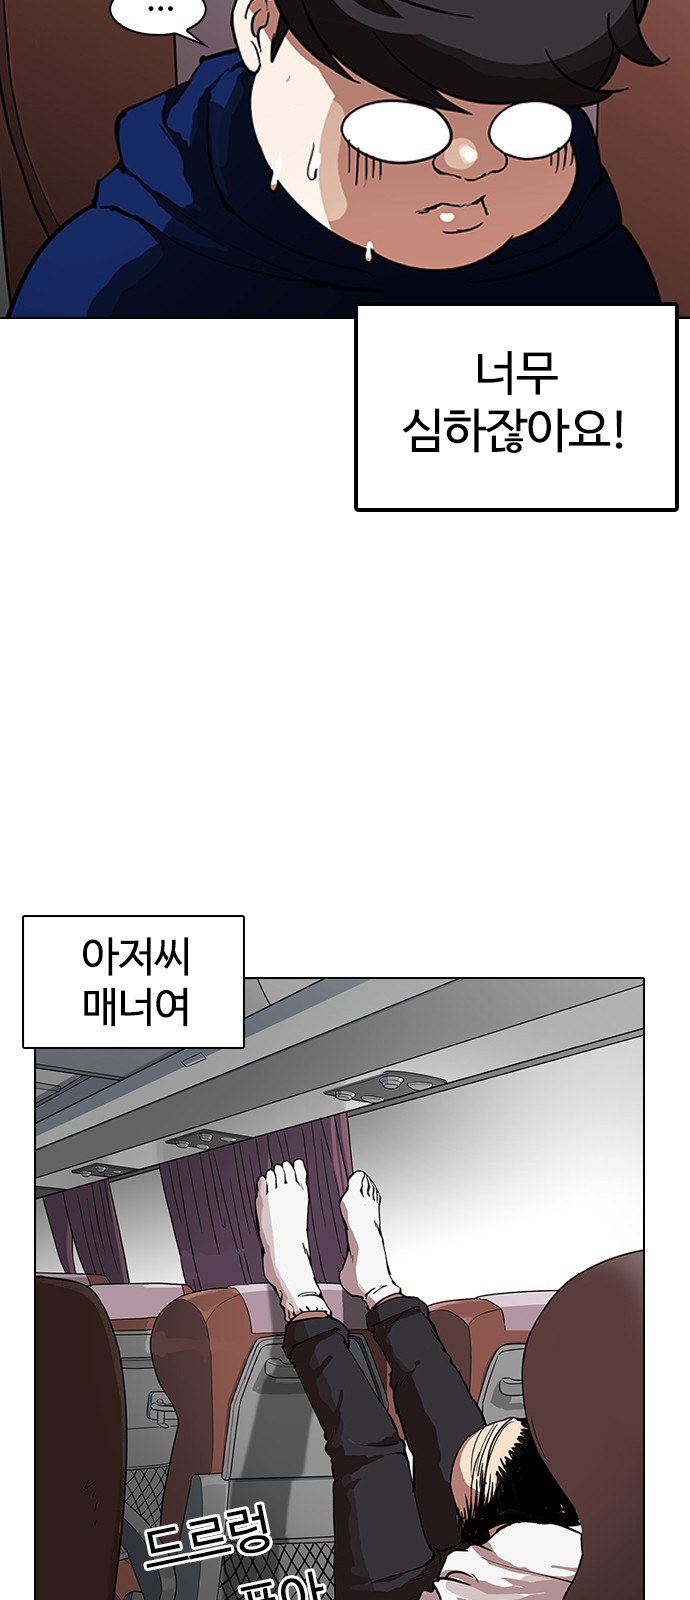 Lookism - Chapter 153 - Page 3